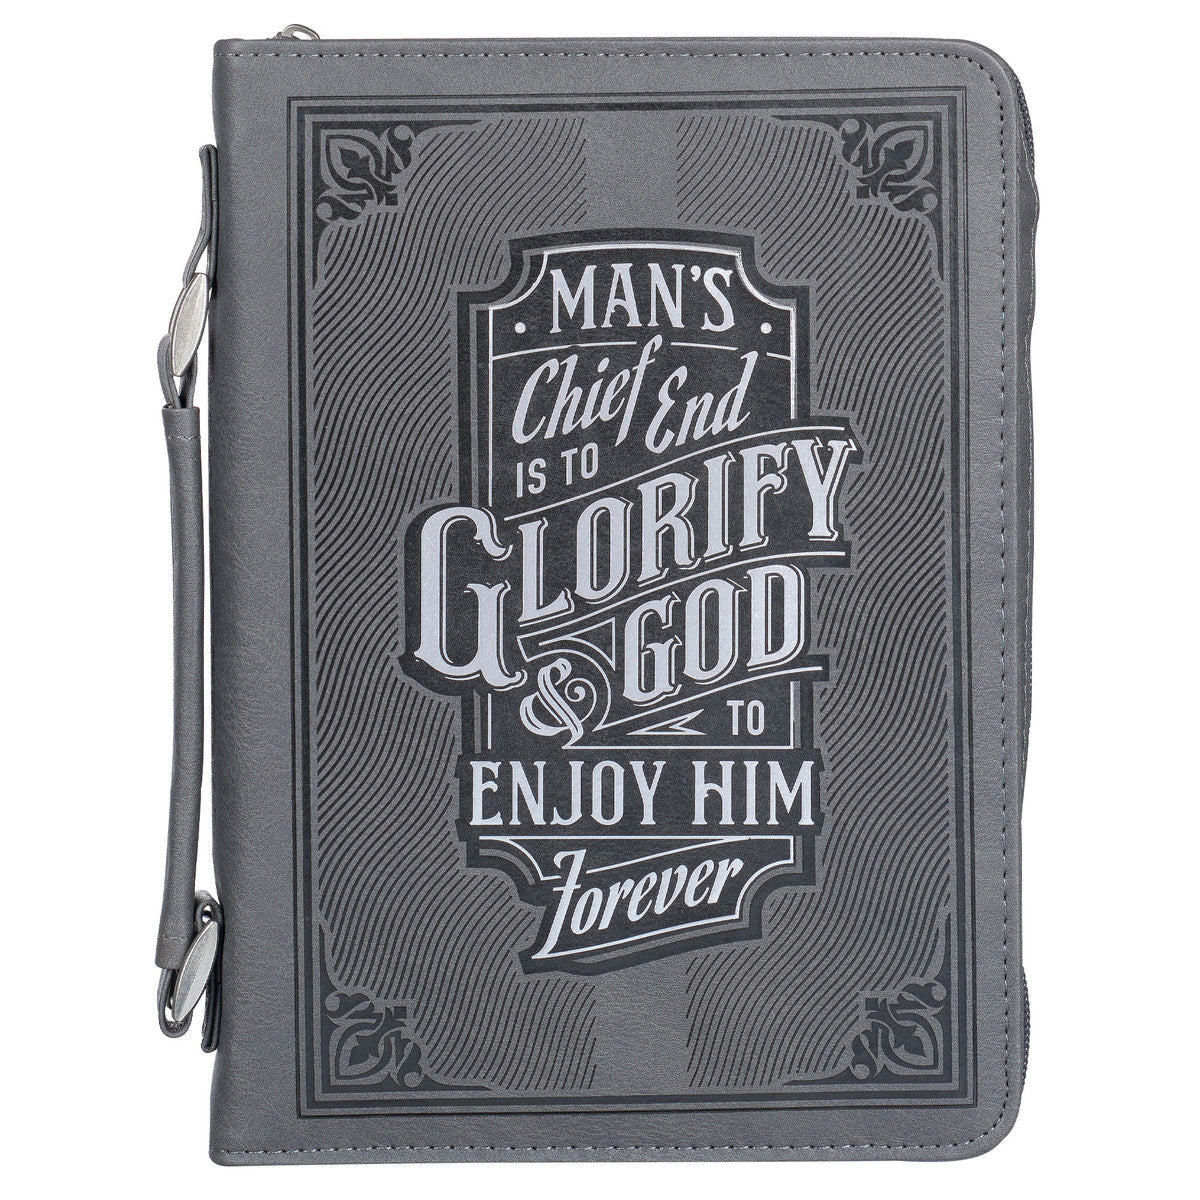 Glorify God Gray Faux Leather Classic Bible Cover - LARGE